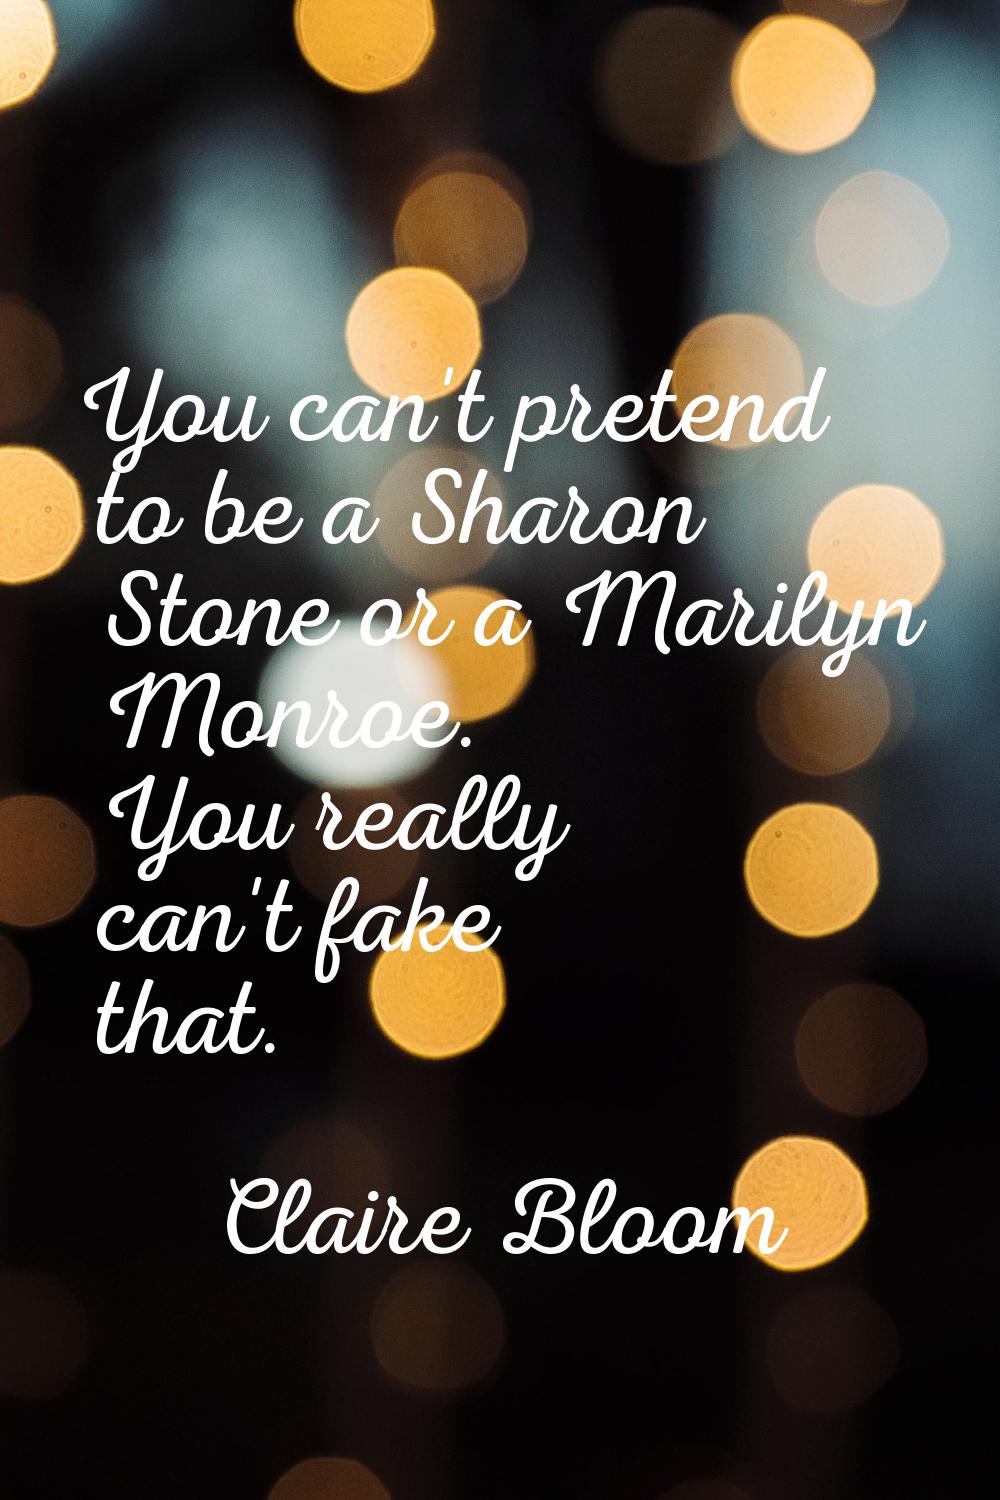 You can't pretend to be a Sharon Stone or a Marilyn Monroe. You really can't fake that.